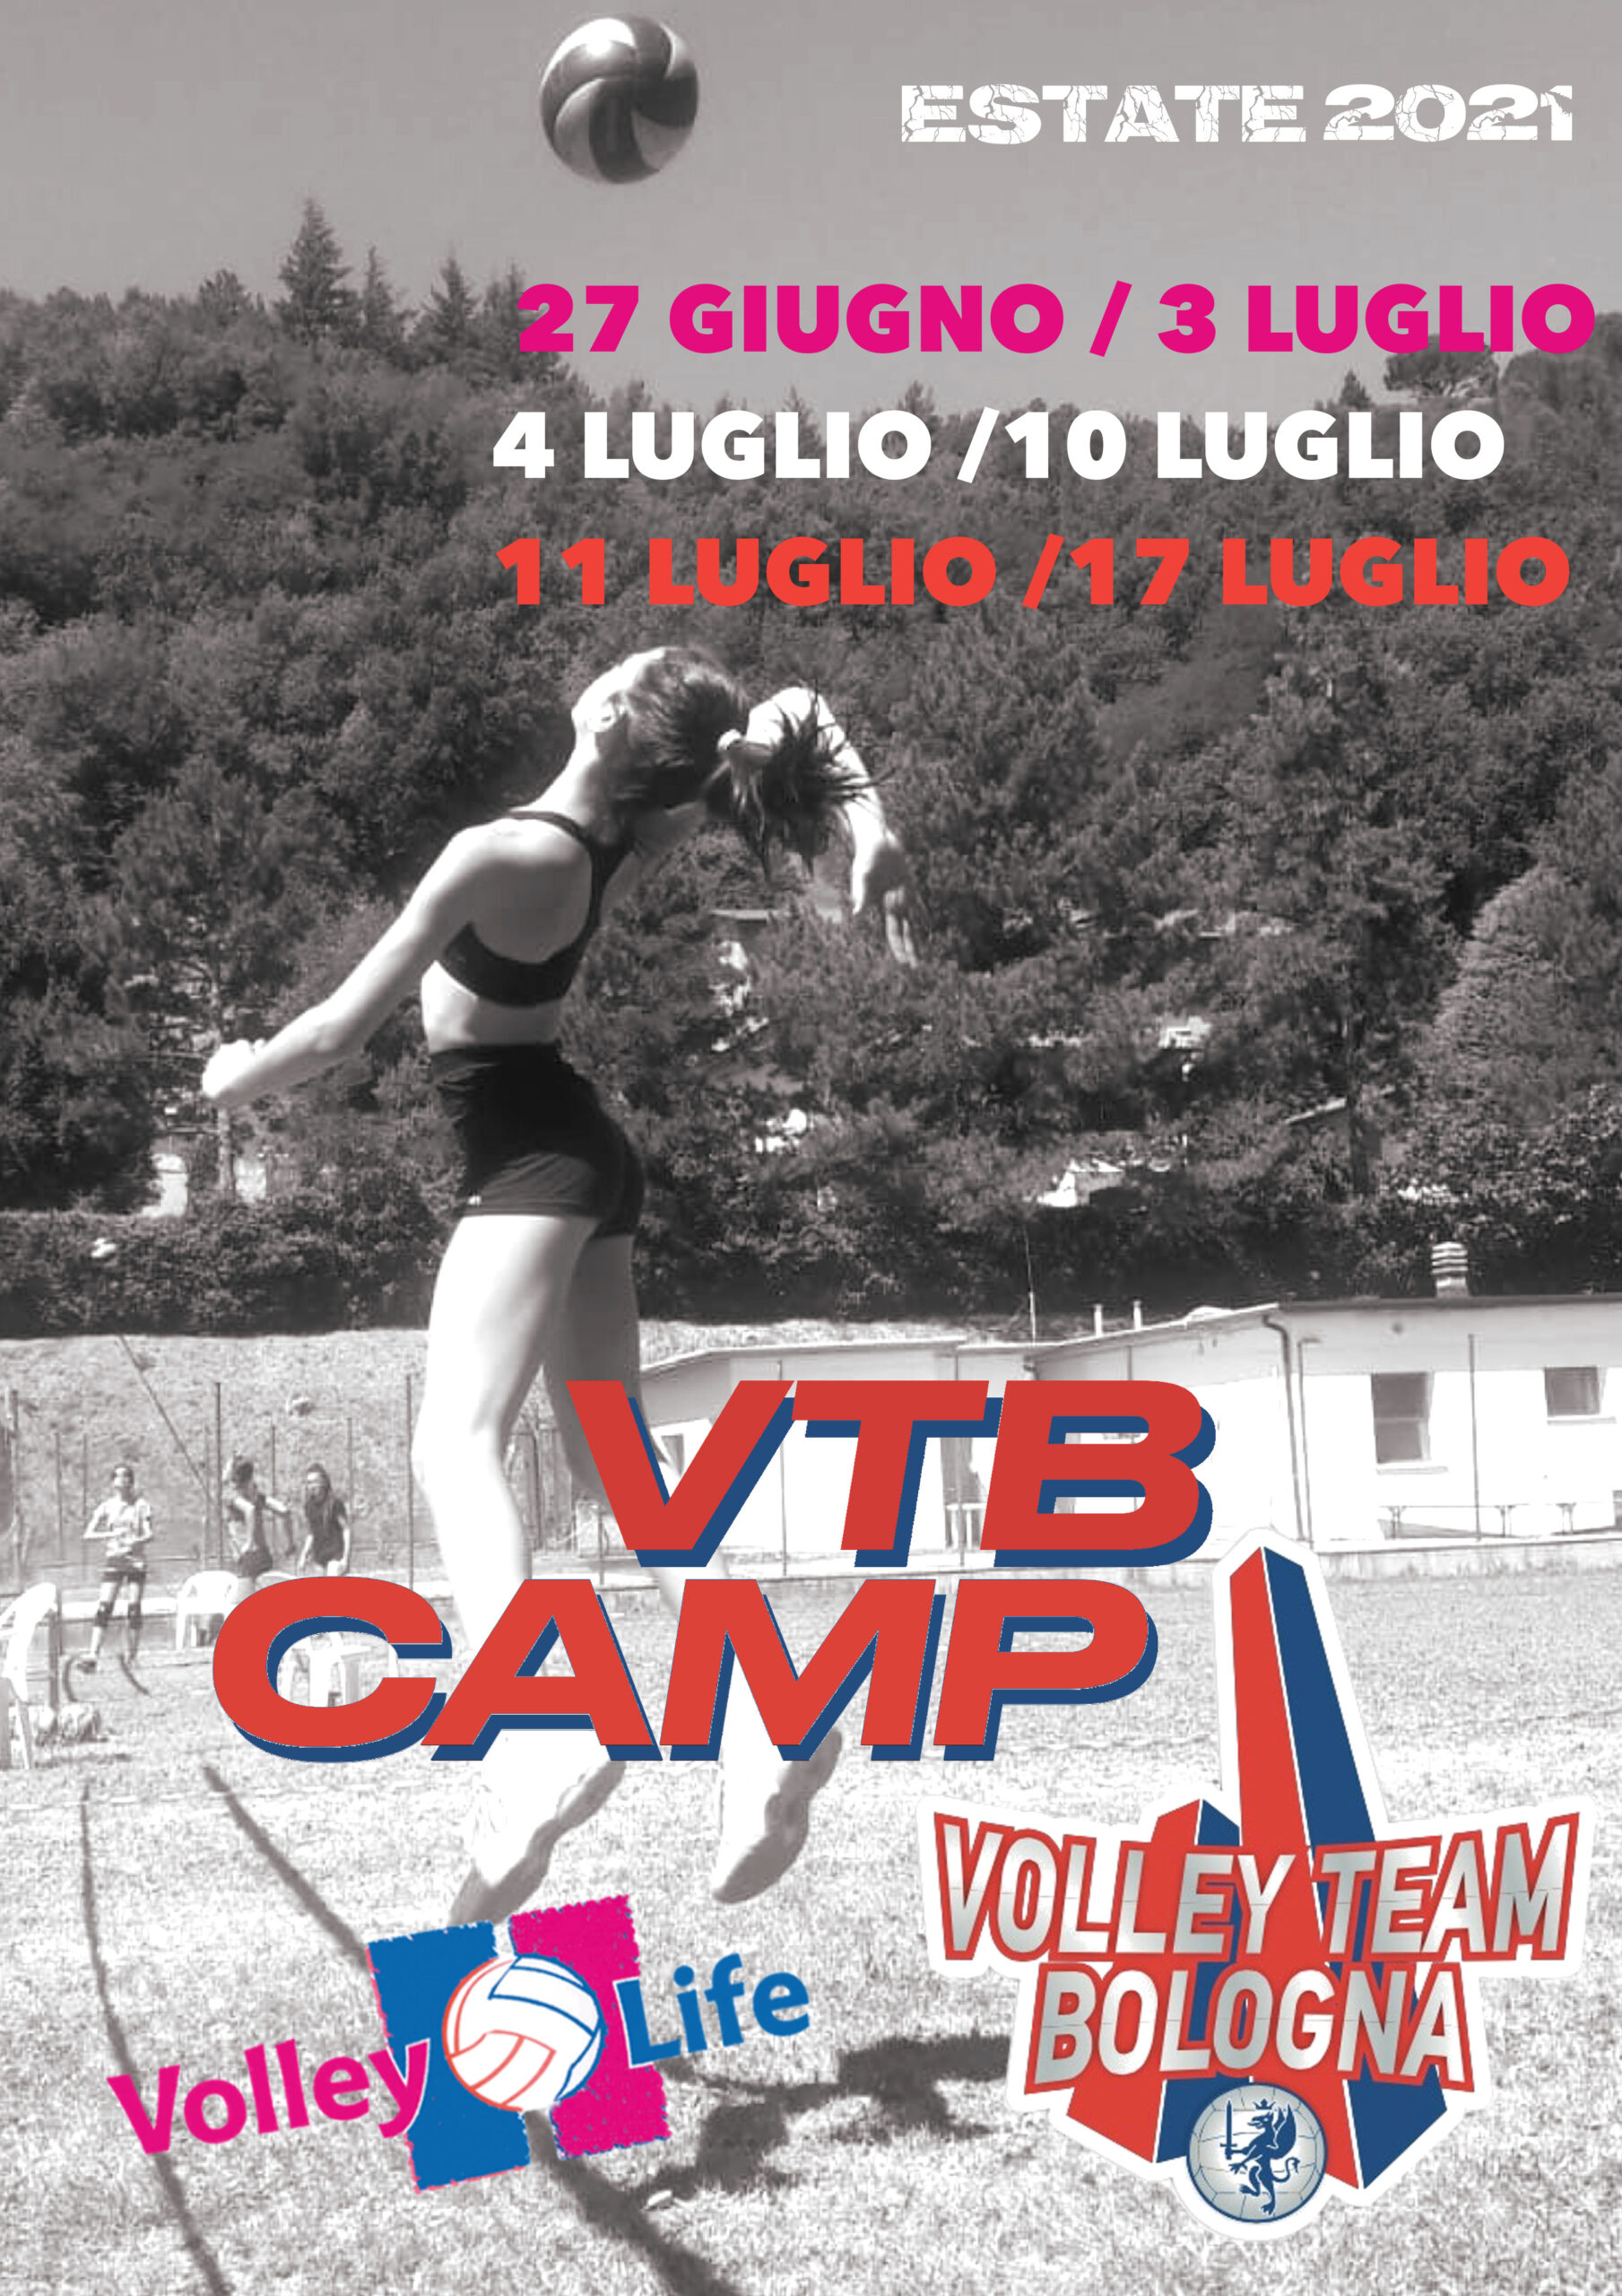 VOLLEY CAMP 2021: LE DATE